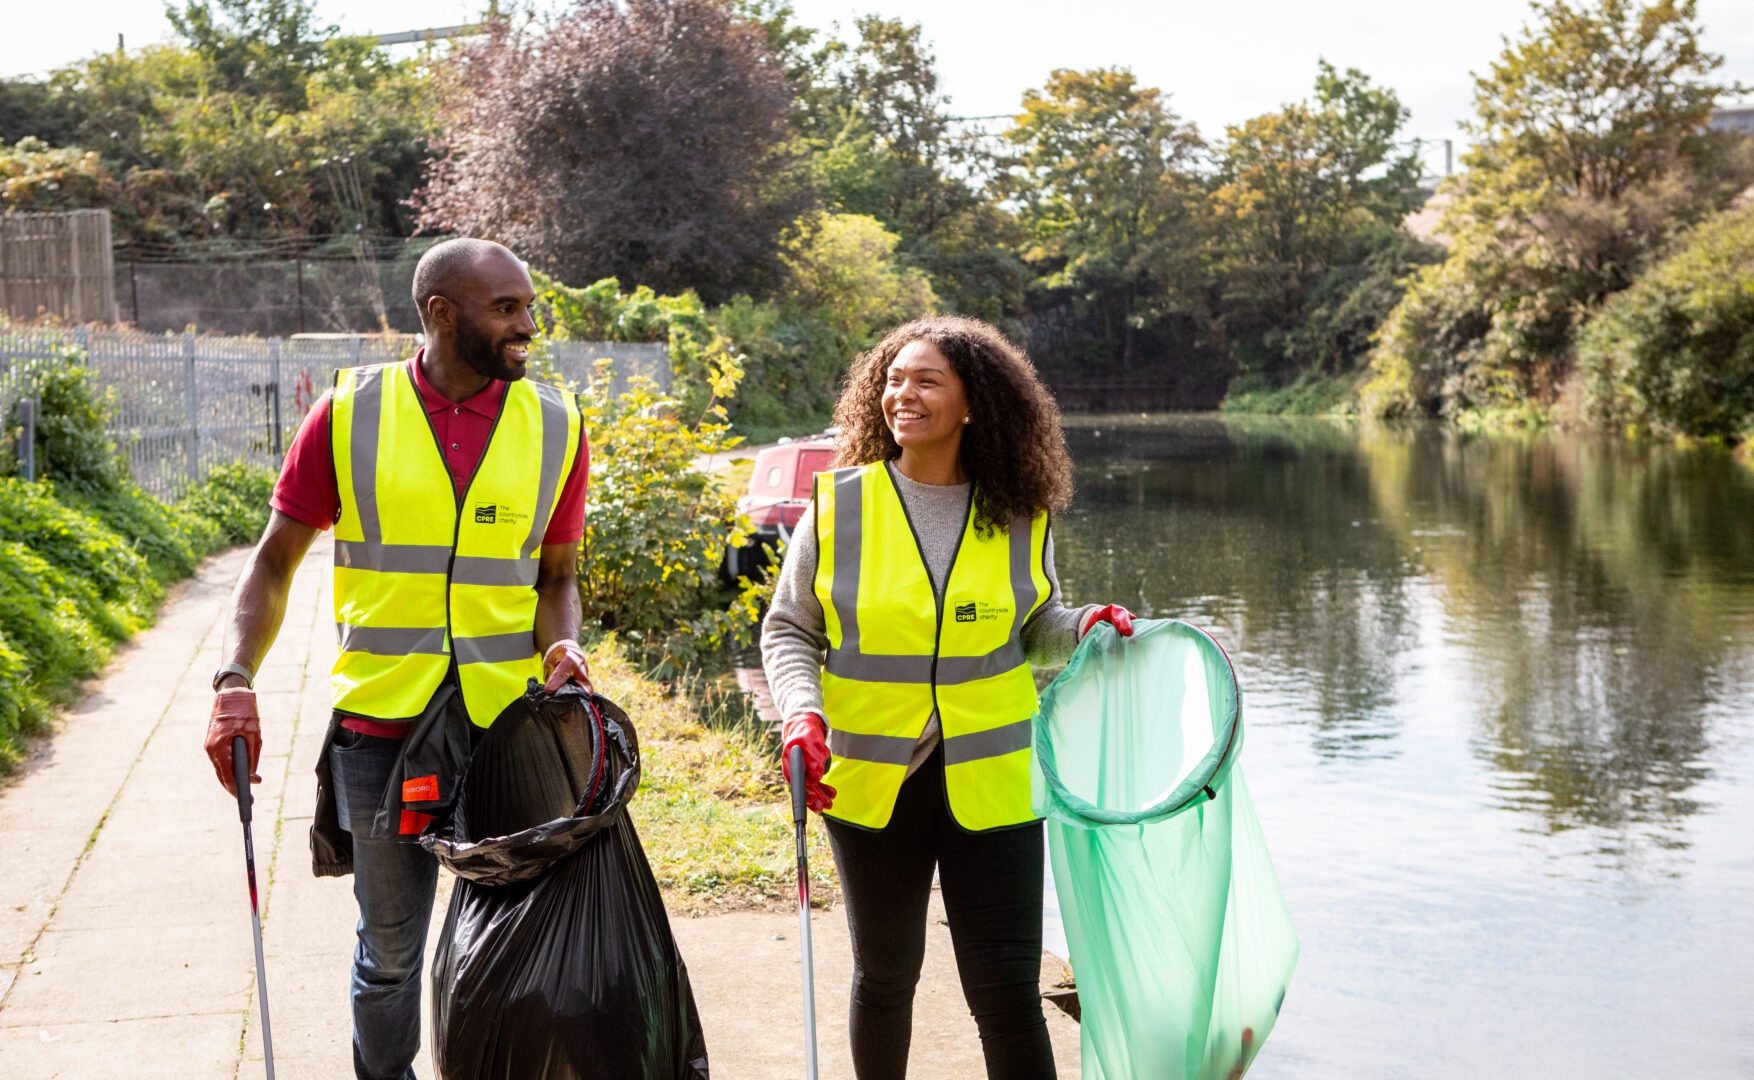 Man and woman in hi-vis jackets walking along canal litter pick